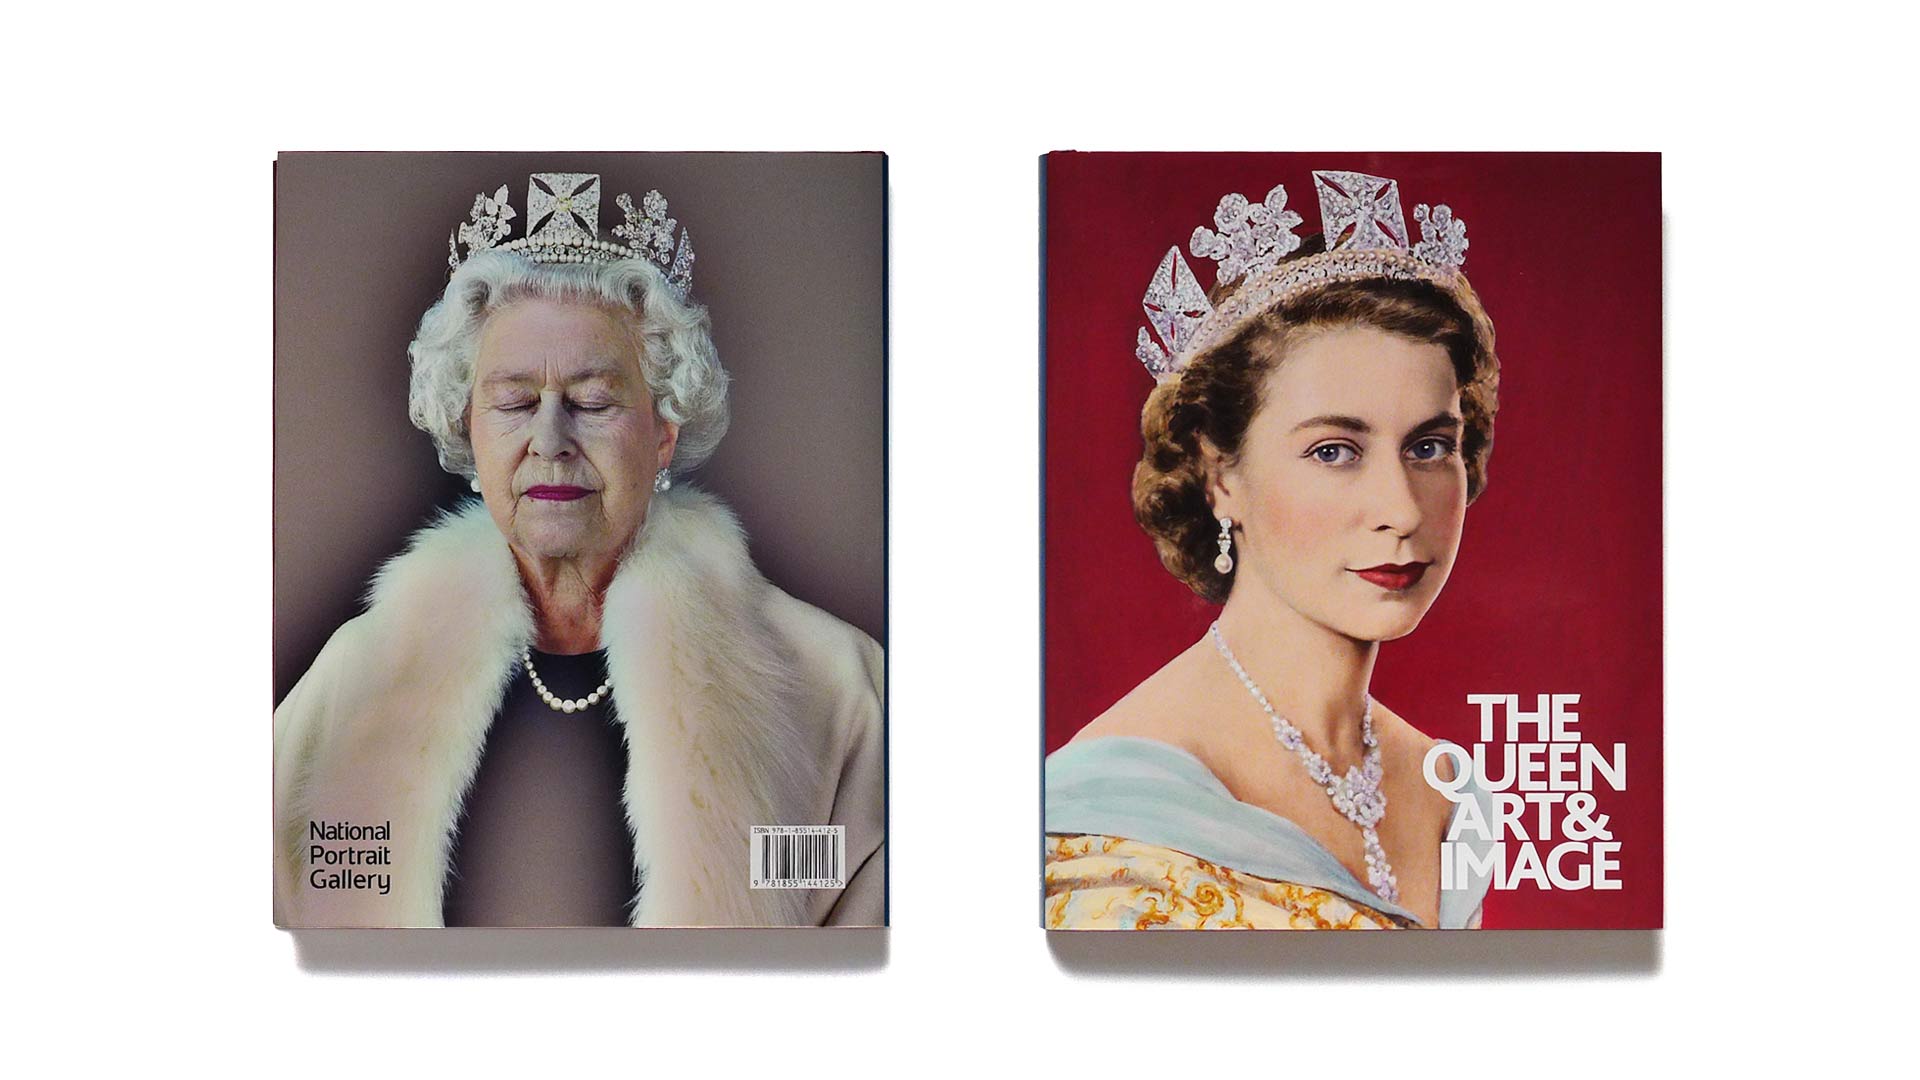 The Queen – Art and Gallery Portrait Manss Image, Thomas Company | & National